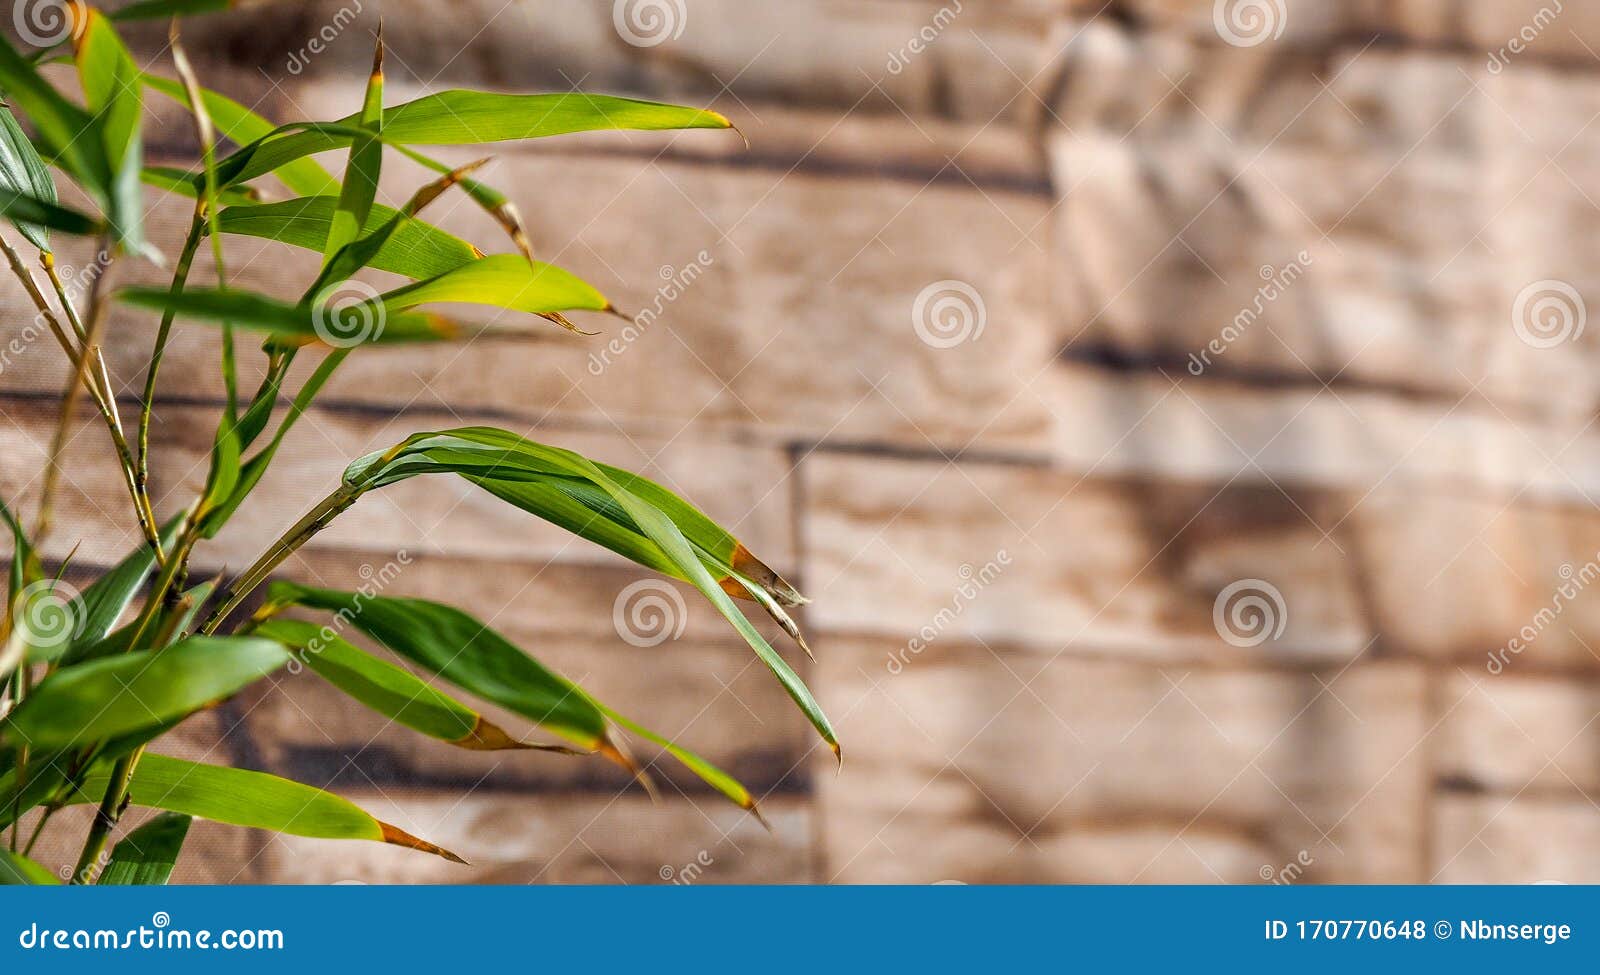 Bamboo Leaves Turning Brown In Winter With Wood Texture In The Background Stock Photo Image Of Garden Plant